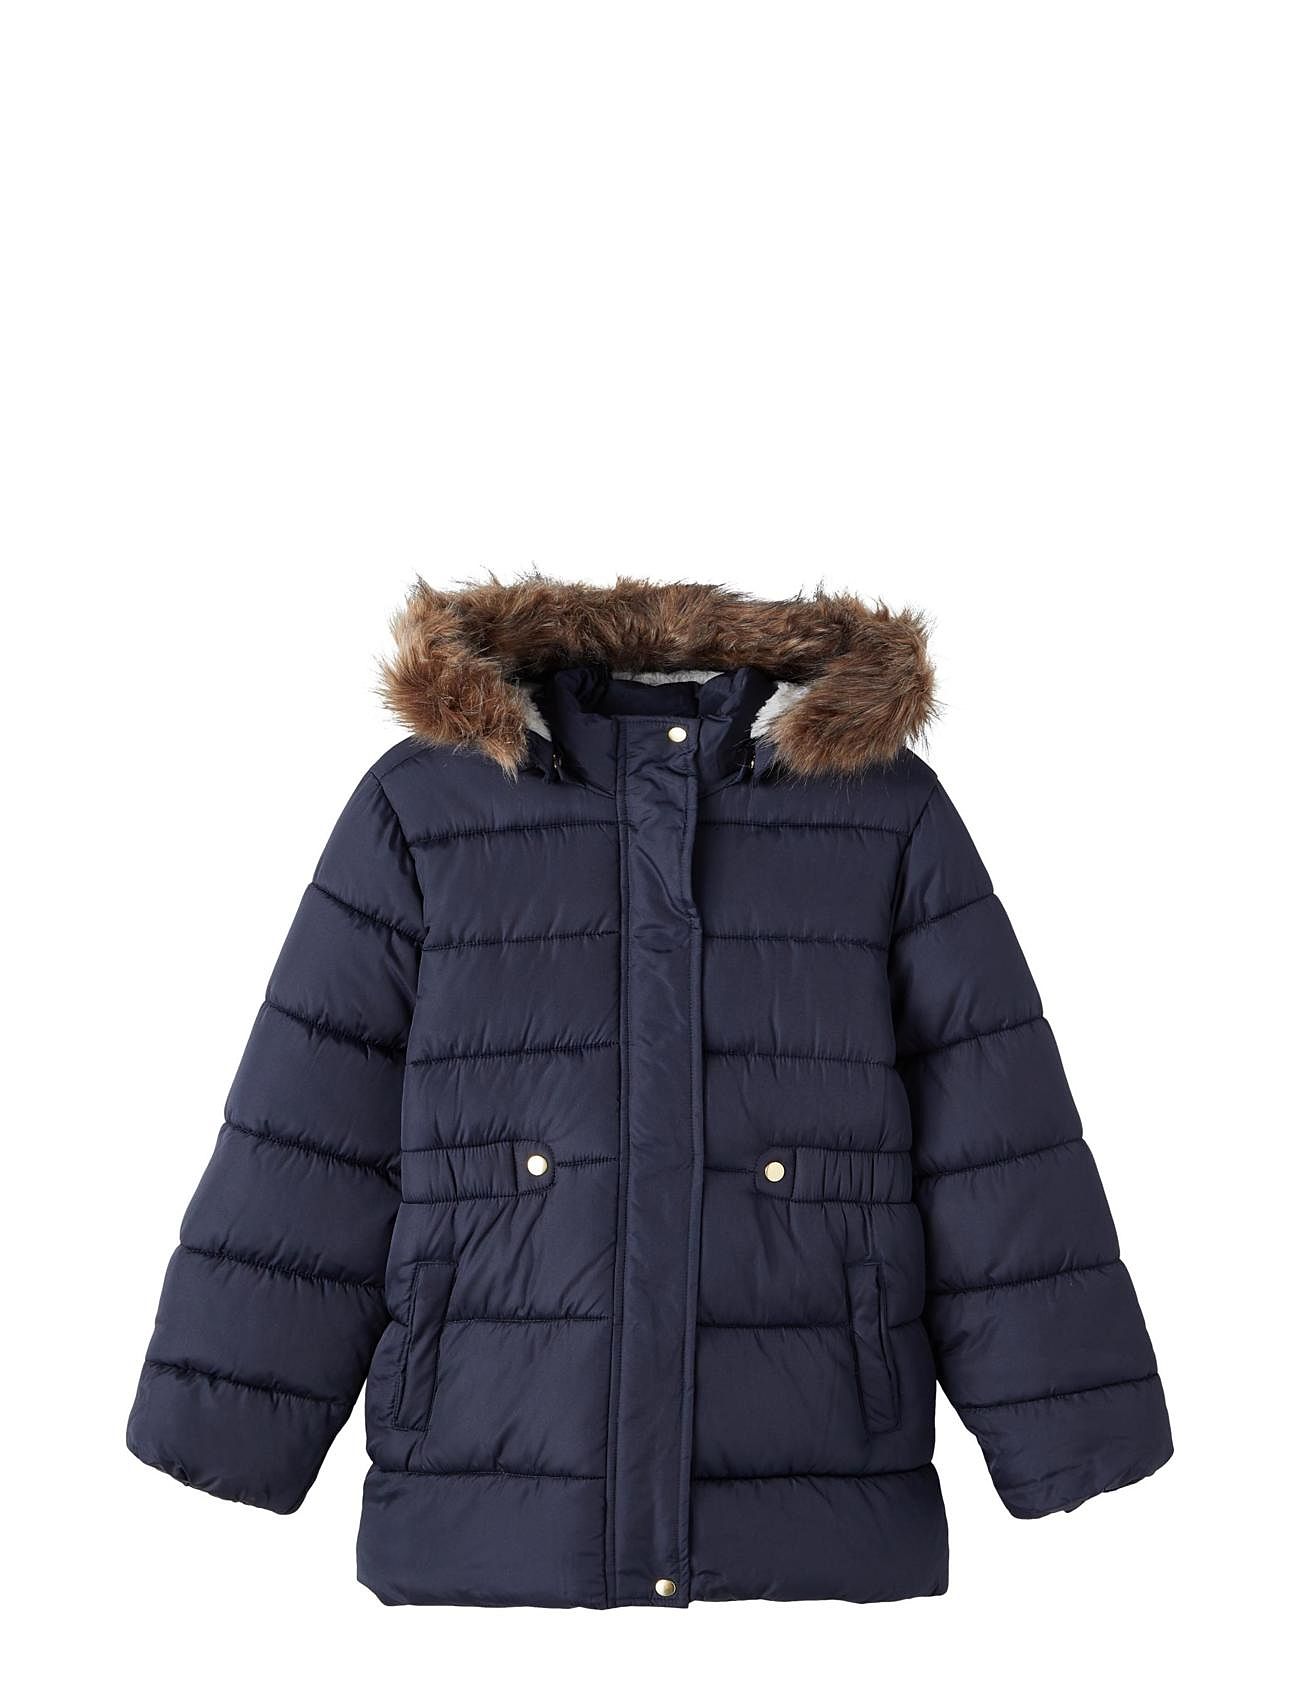 name it Nkfmerethe Jacket2 Noos - 30.00 €. Buy Puffer & Padded from name it  online at Boozt.com. Fast delivery and easy returns